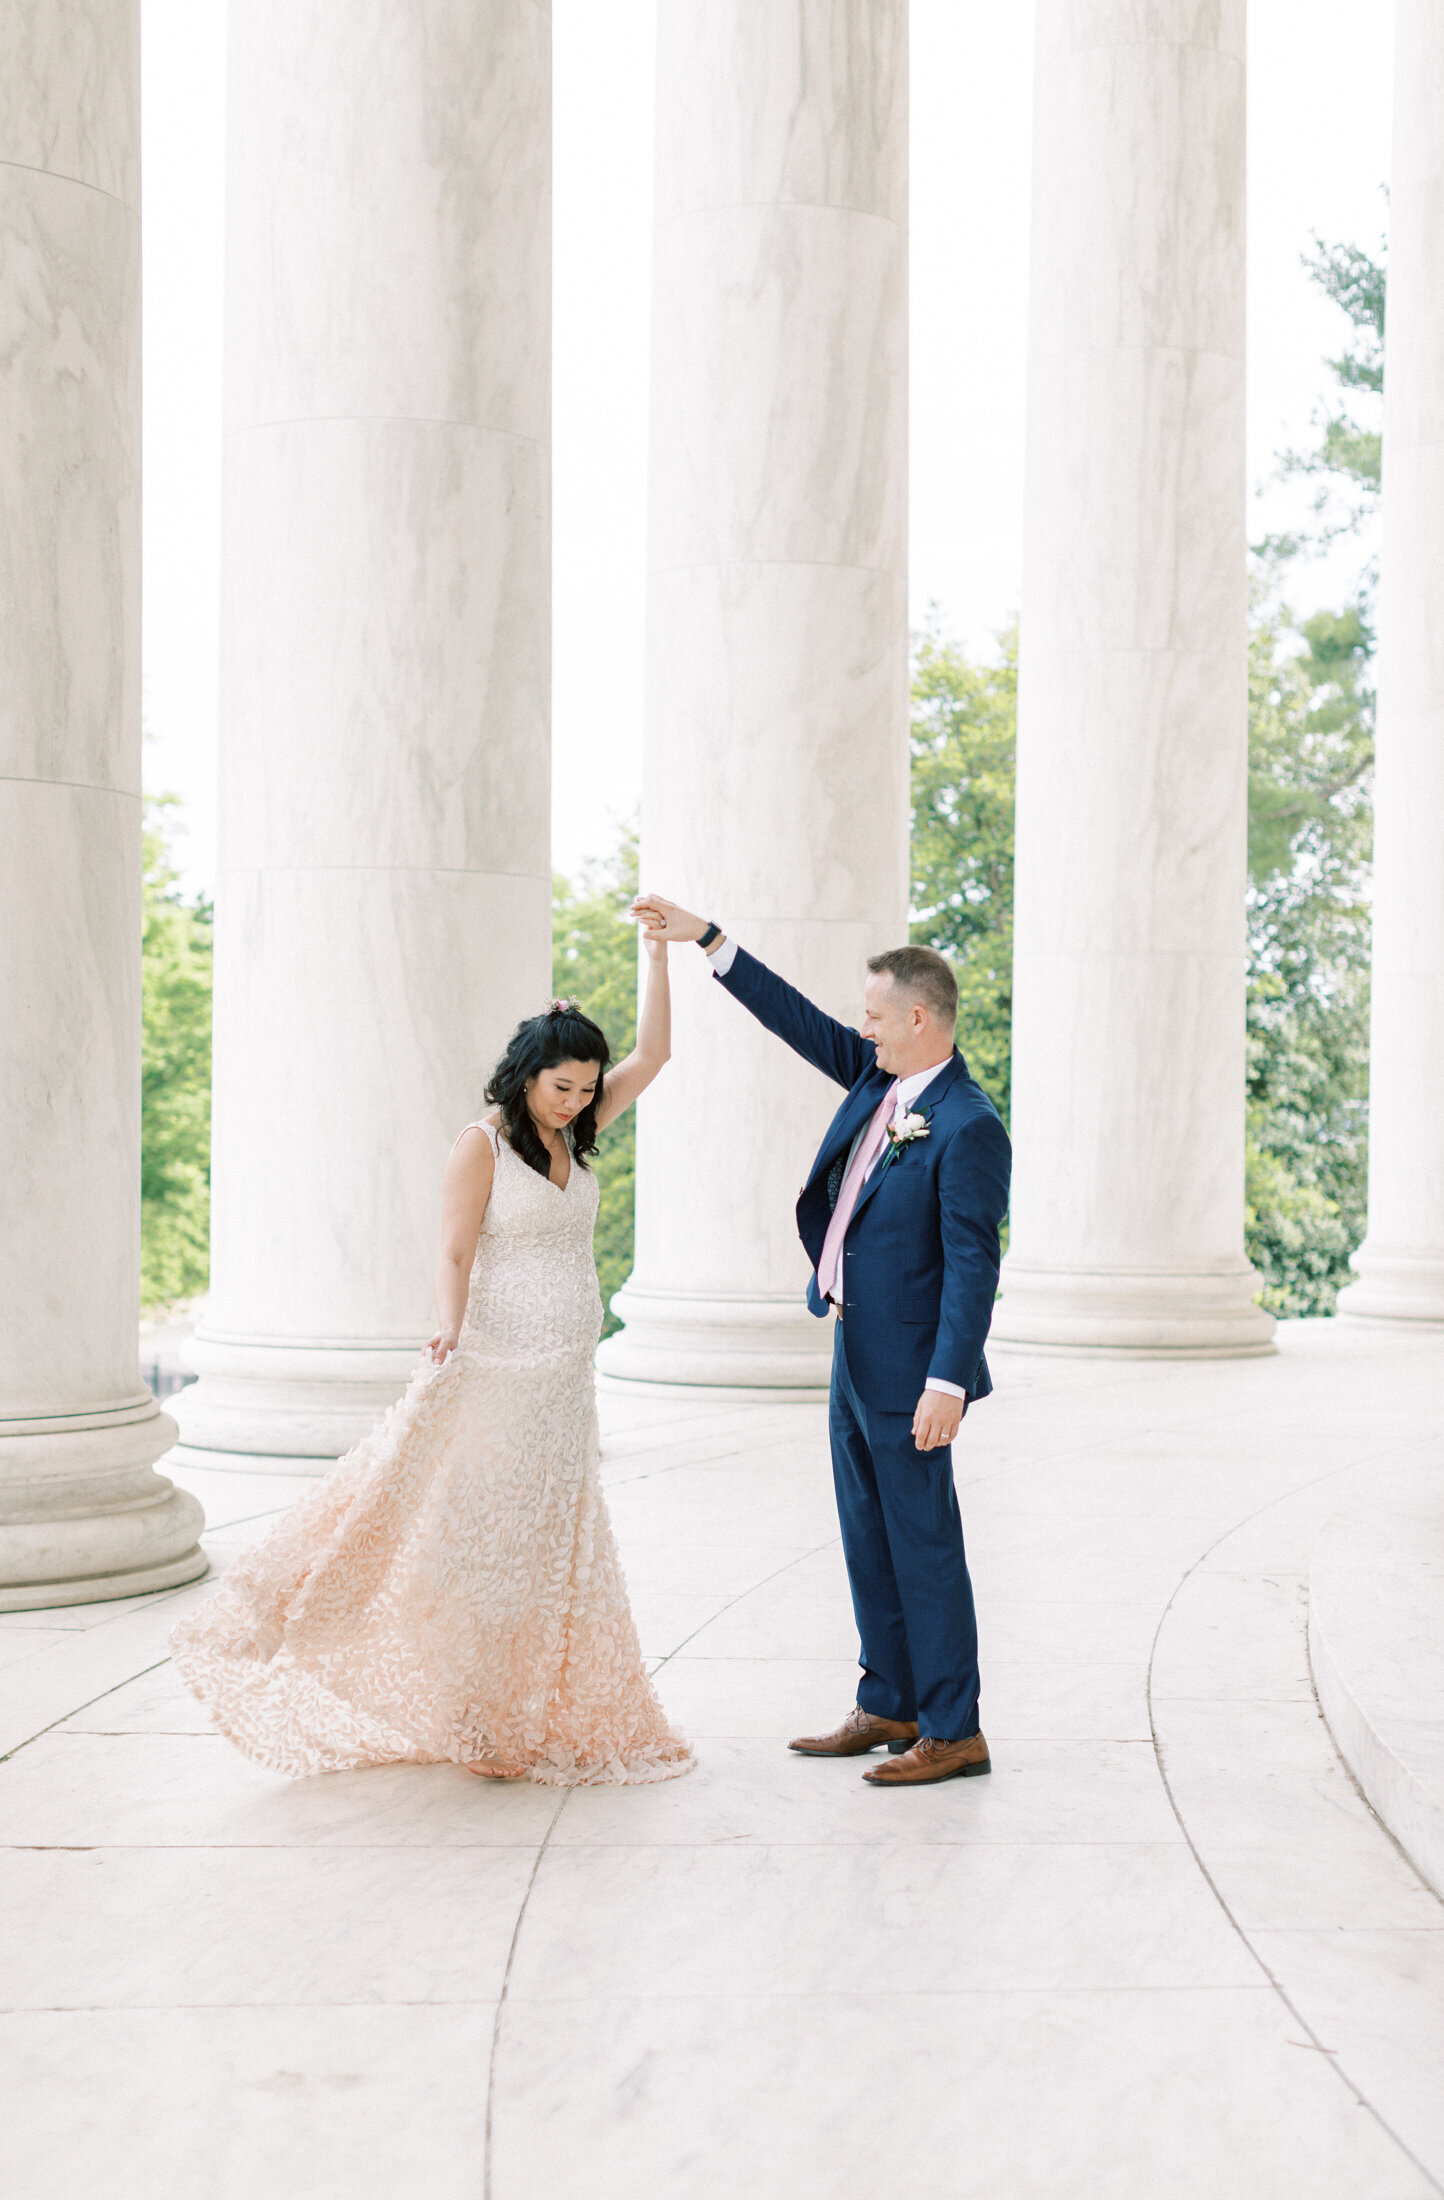 Groom spins the bride at Thomas Jefferson Monument